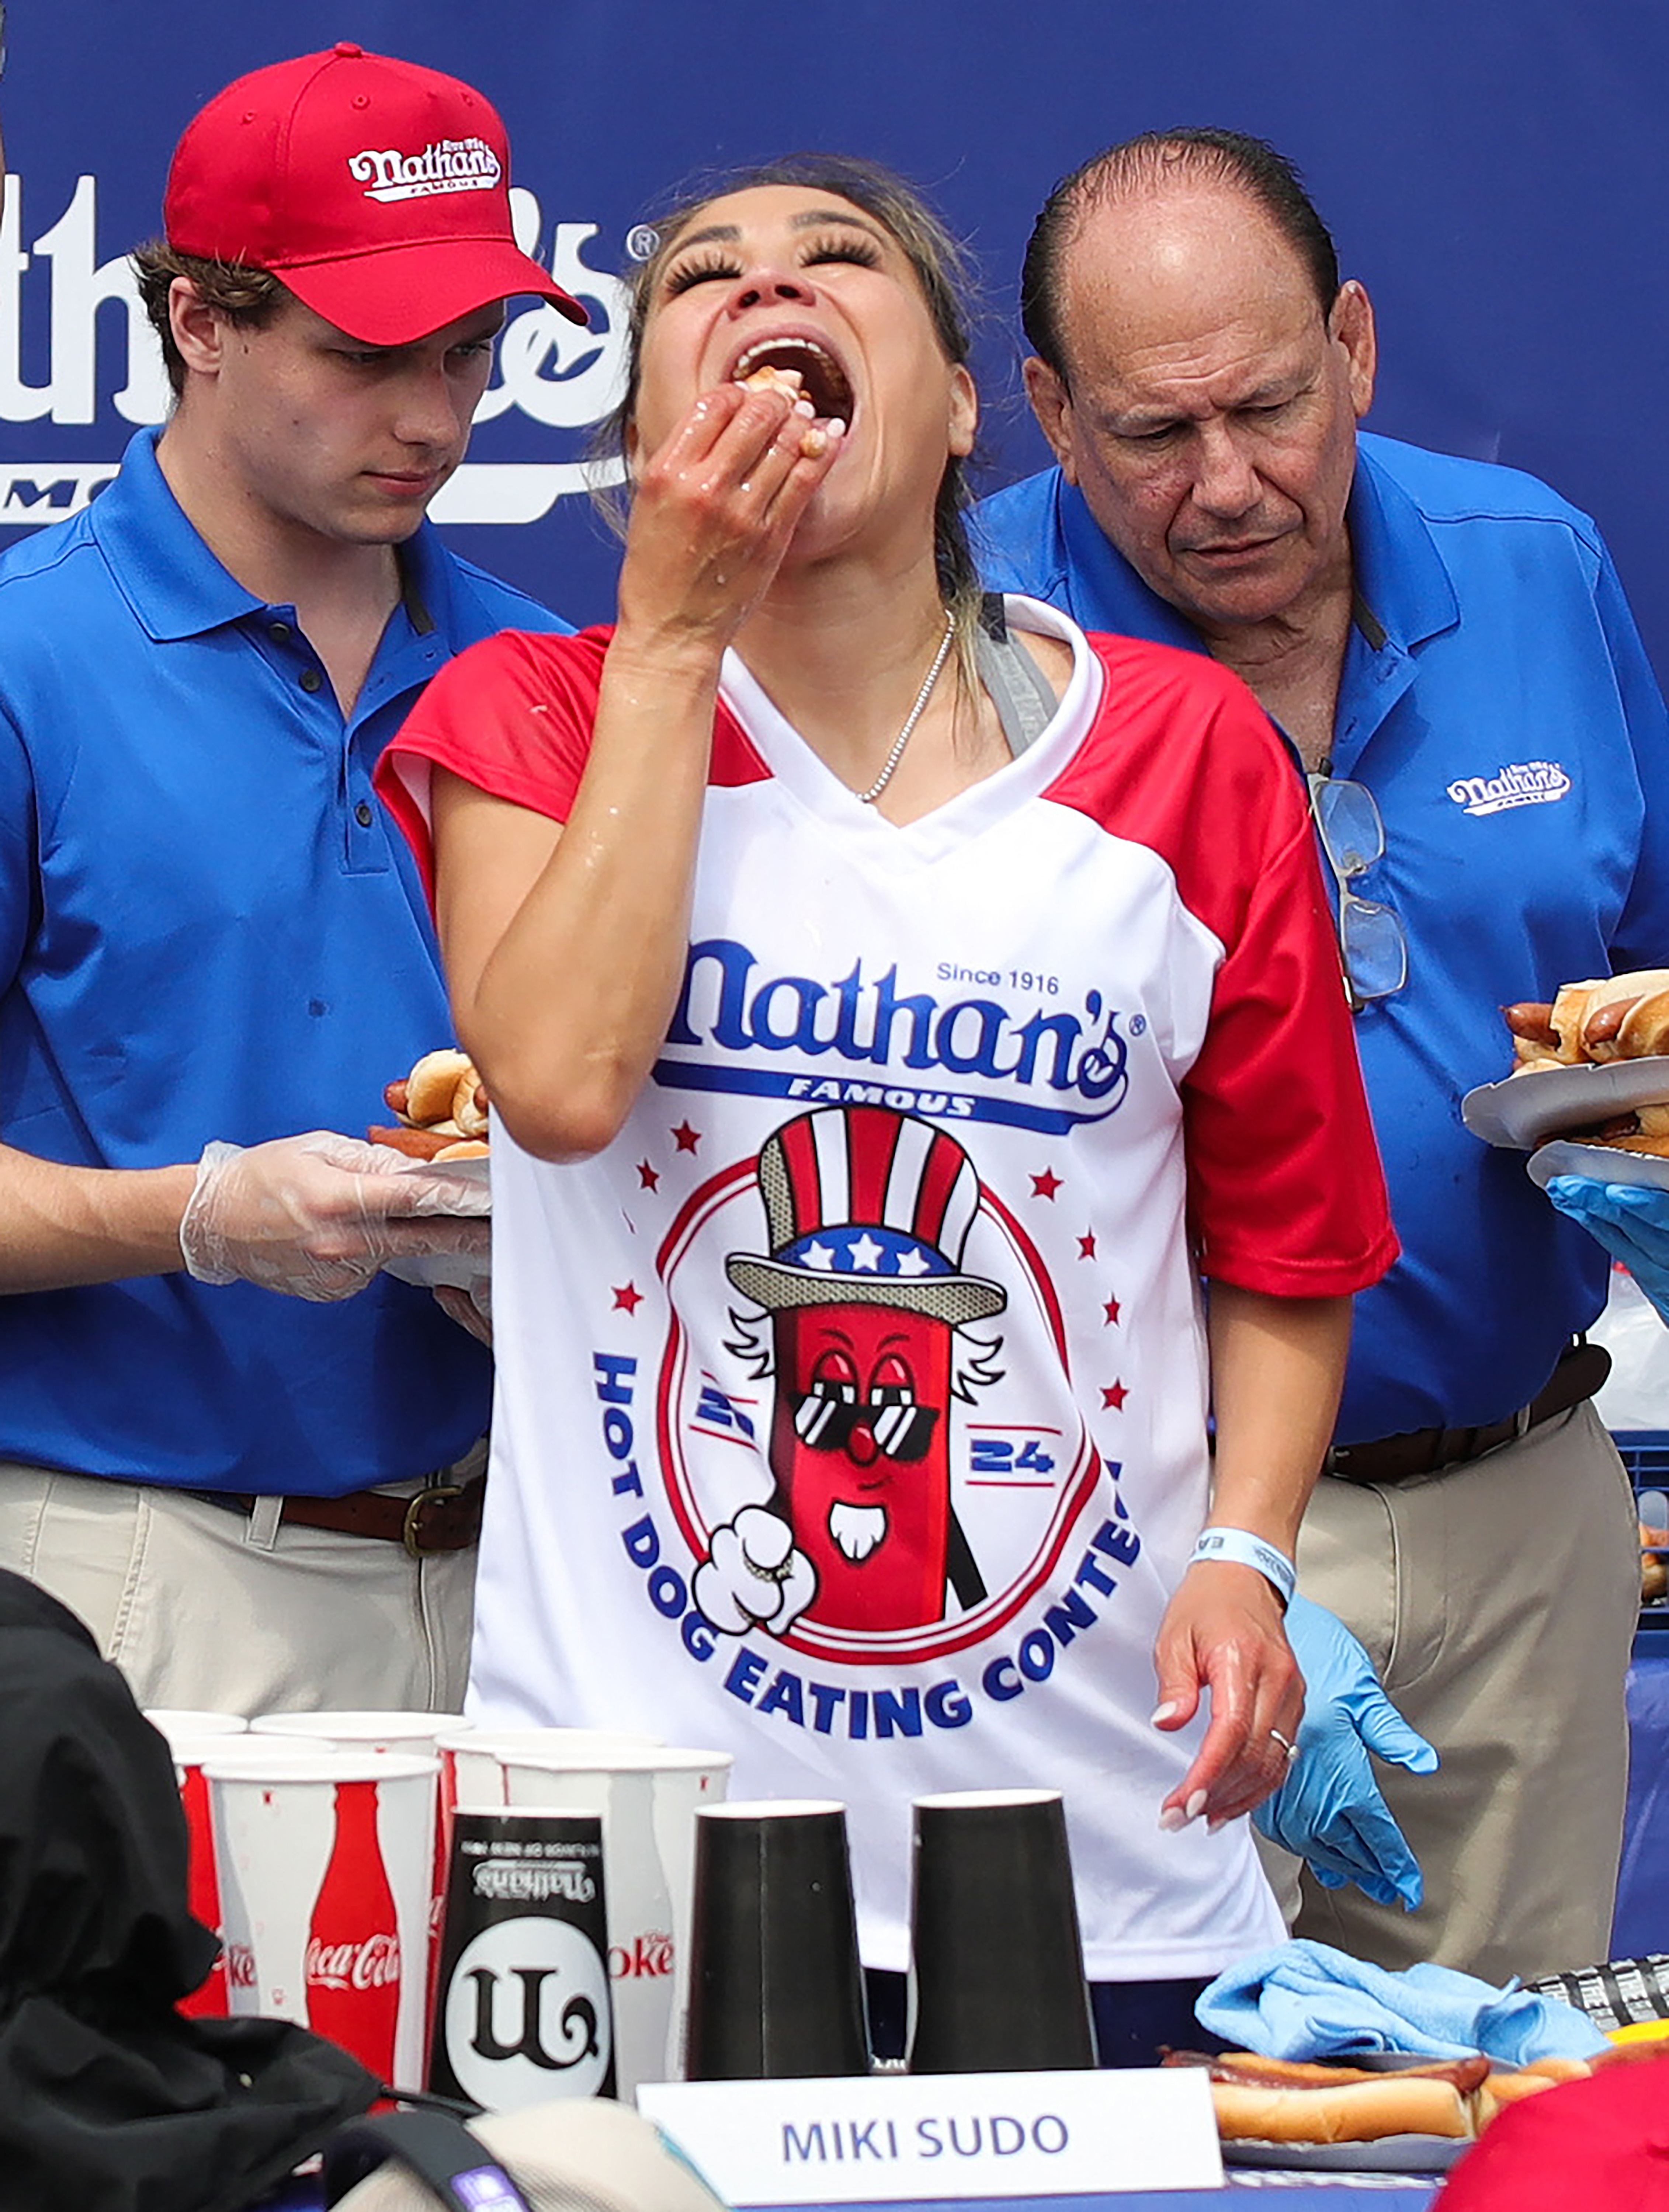 Miki Sudo competes for the women's title during the 2024 Nathan's Famous Fourth of July hot dog eating competition at Coney Island in the Brooklyn borough of New York on July 4, 2024. Sudo won after consuming a record-breaking 51 hotdogs. (Photo by Leonardo Munoz / AFP) (Photo by LEONARDO MUNOZ/AFP via Getty Images)